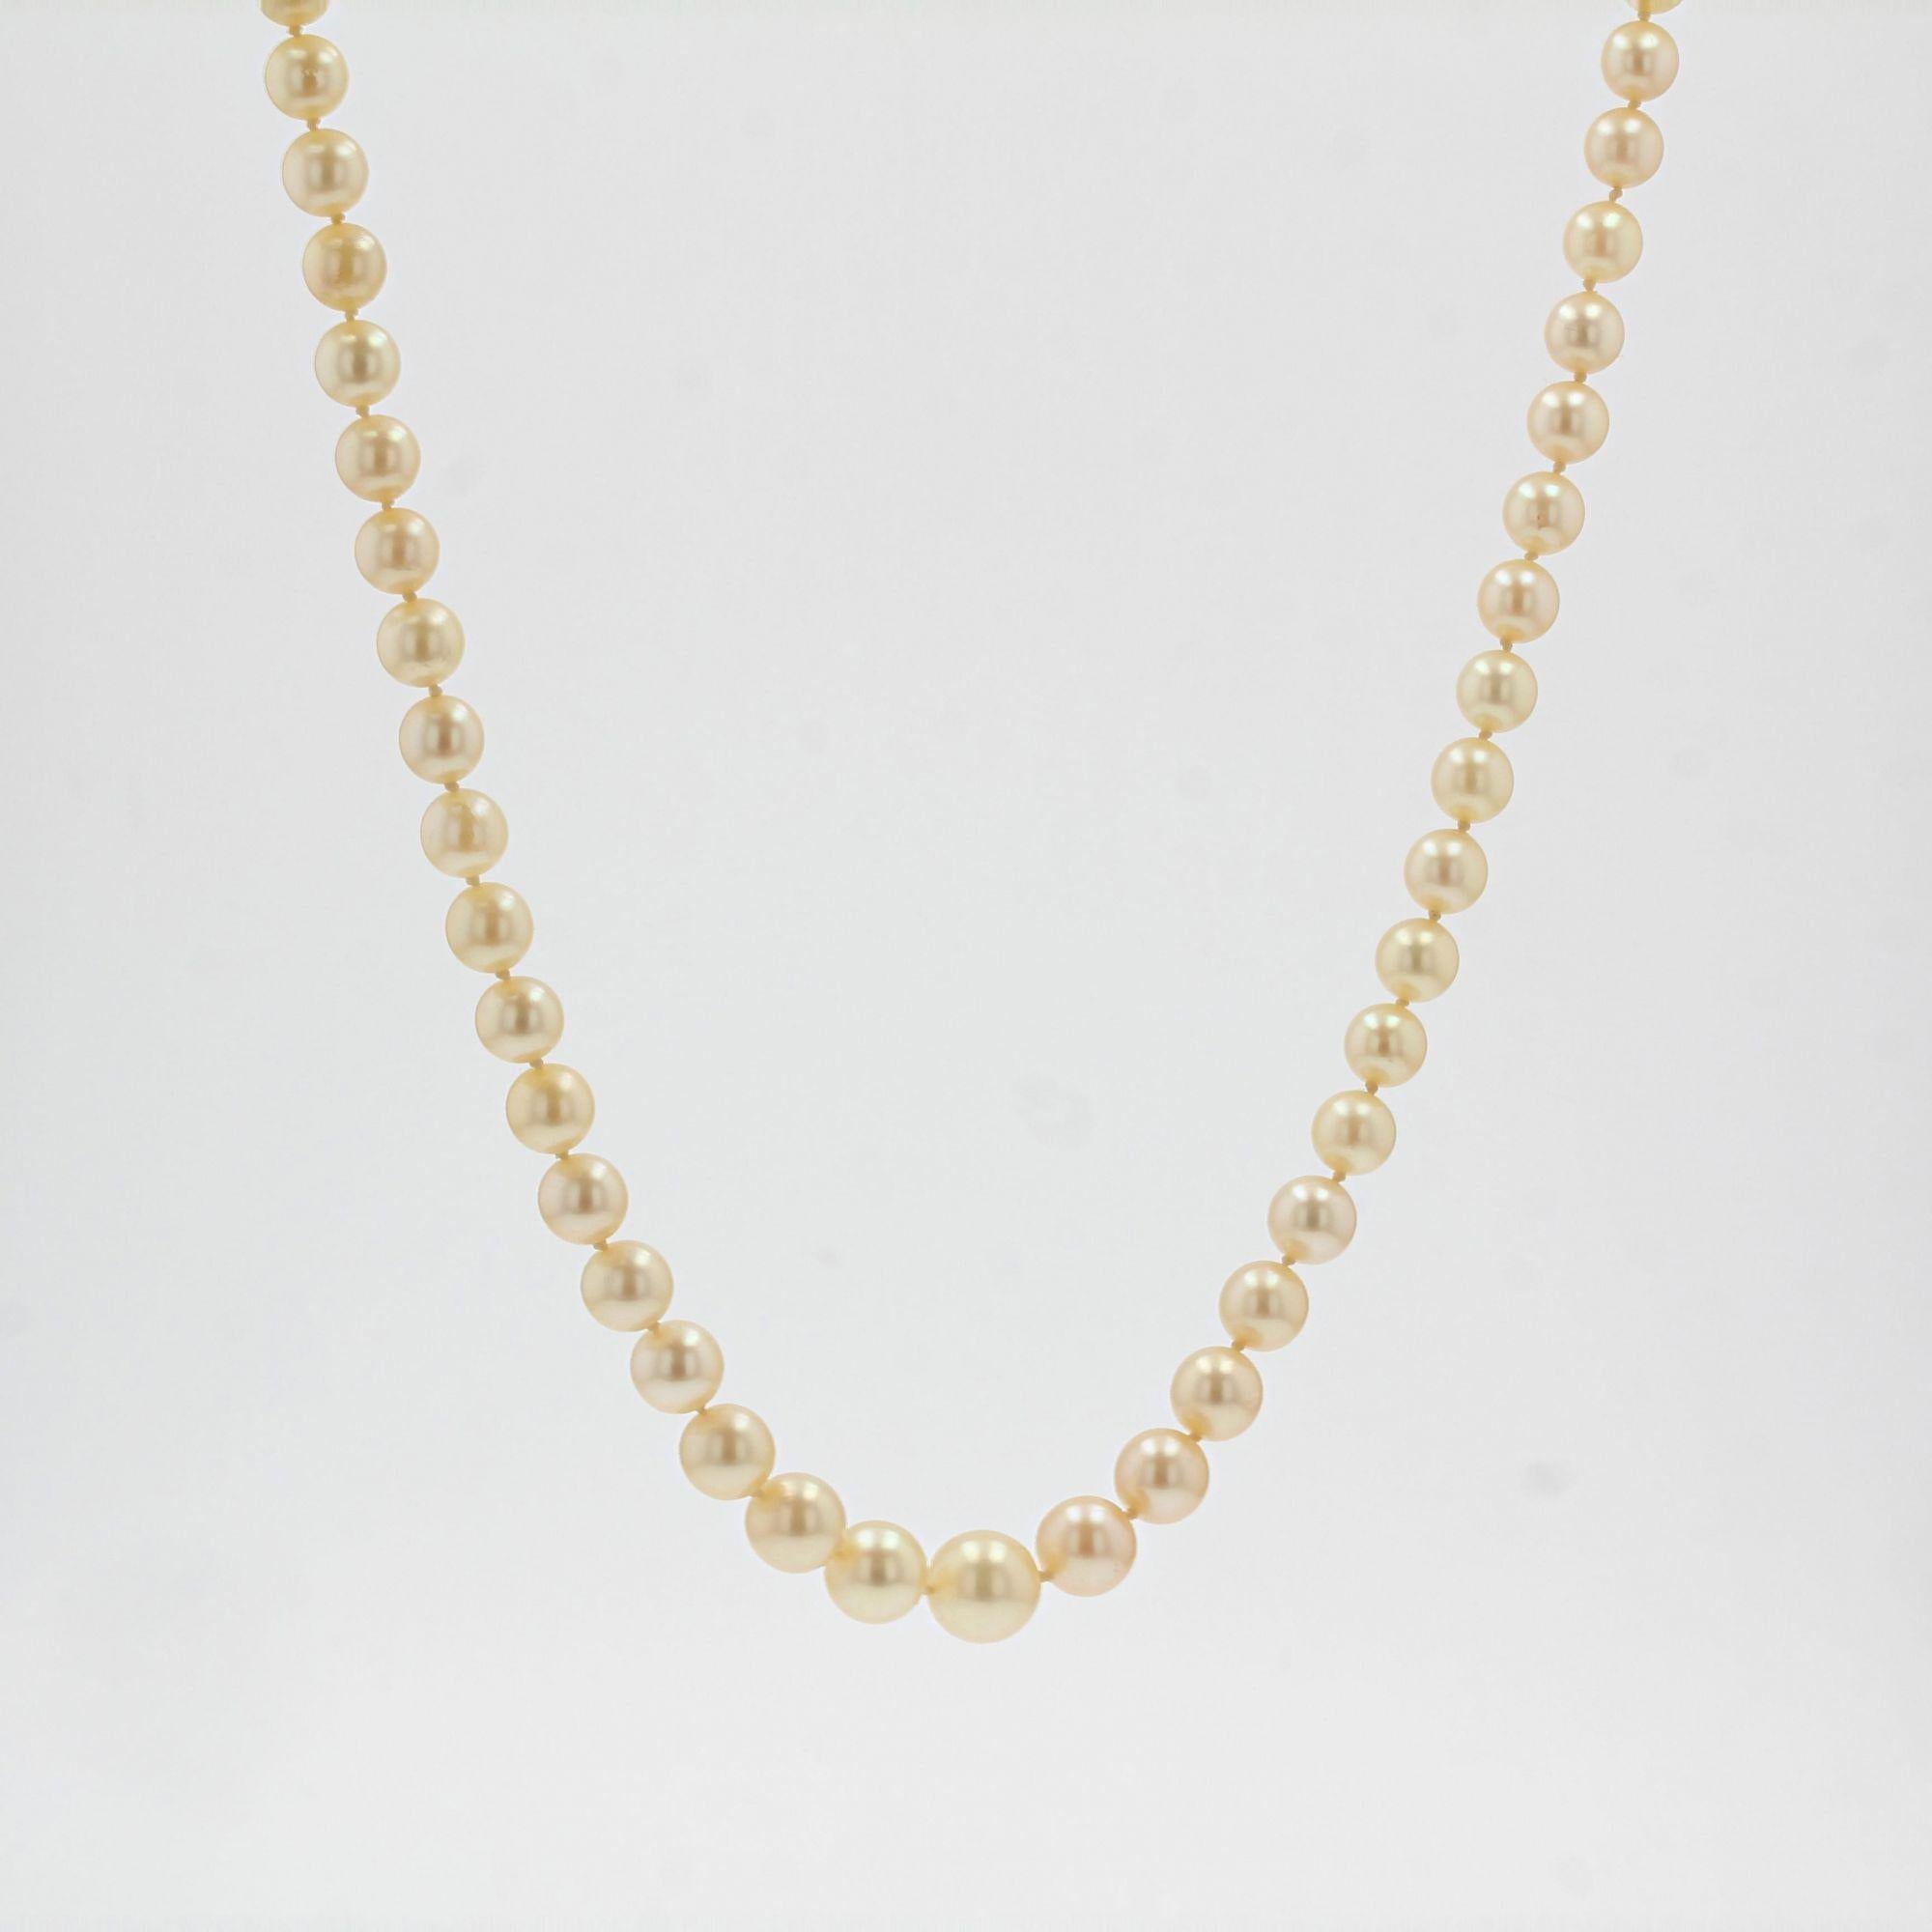 French 1950s Cultured Golden Falling Pearl Necklace For Sale 4